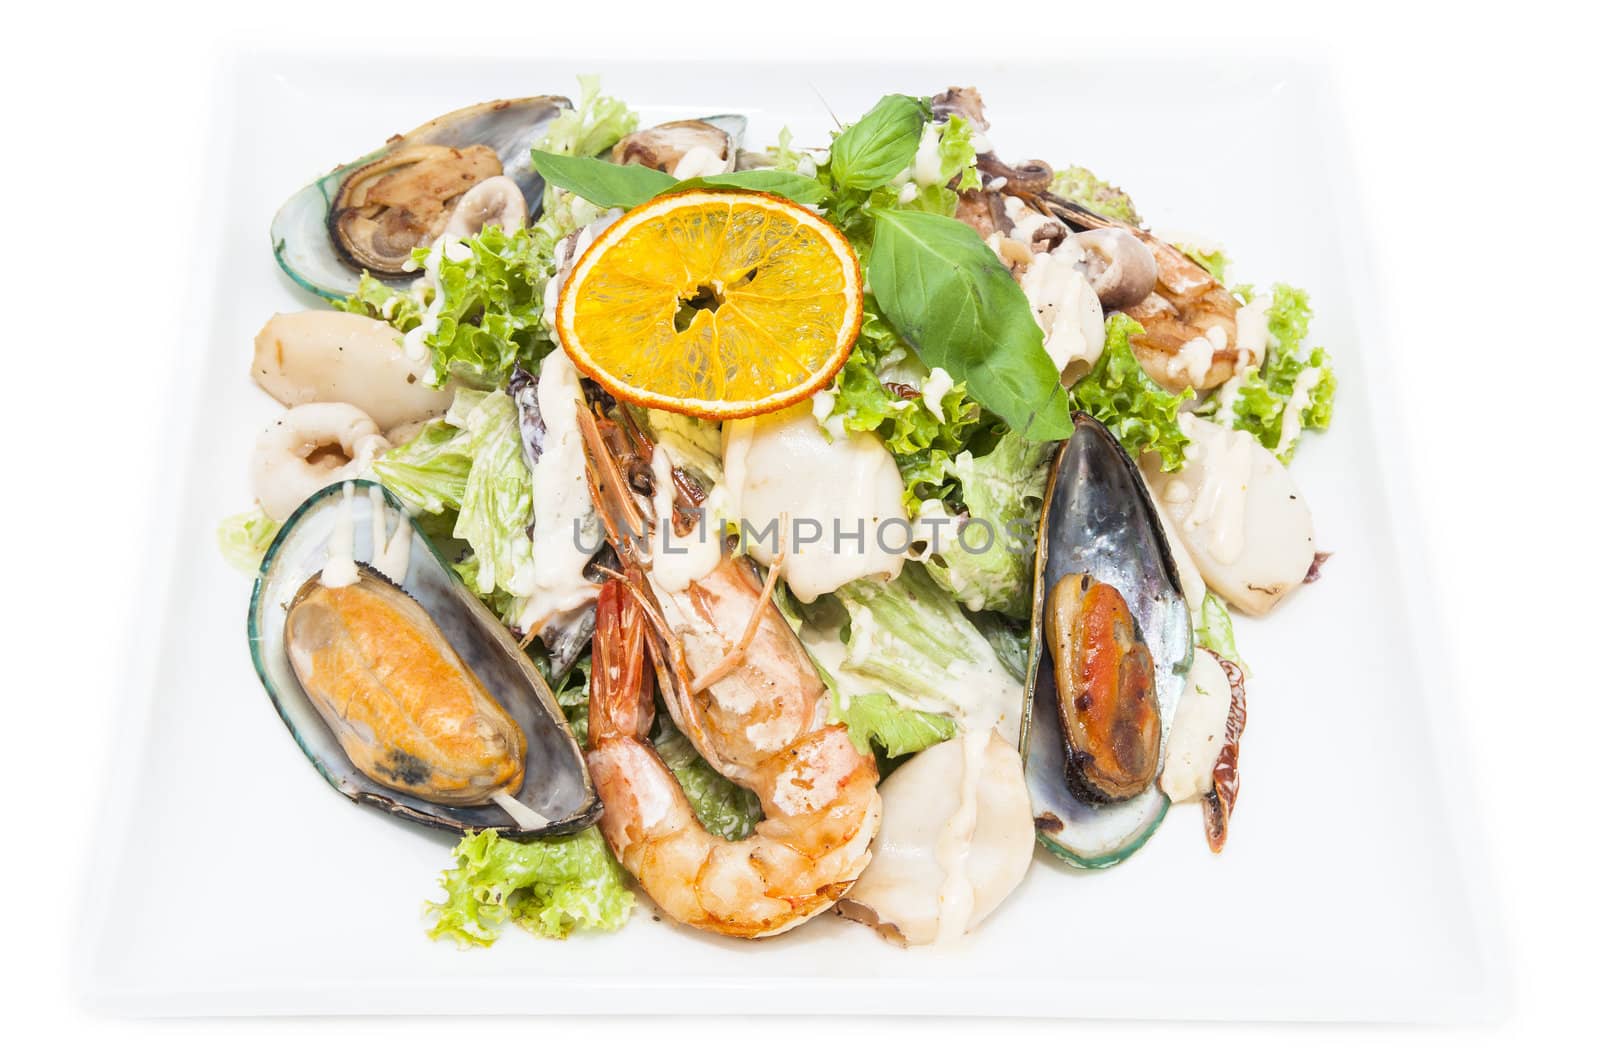 seafood salad by Lester120